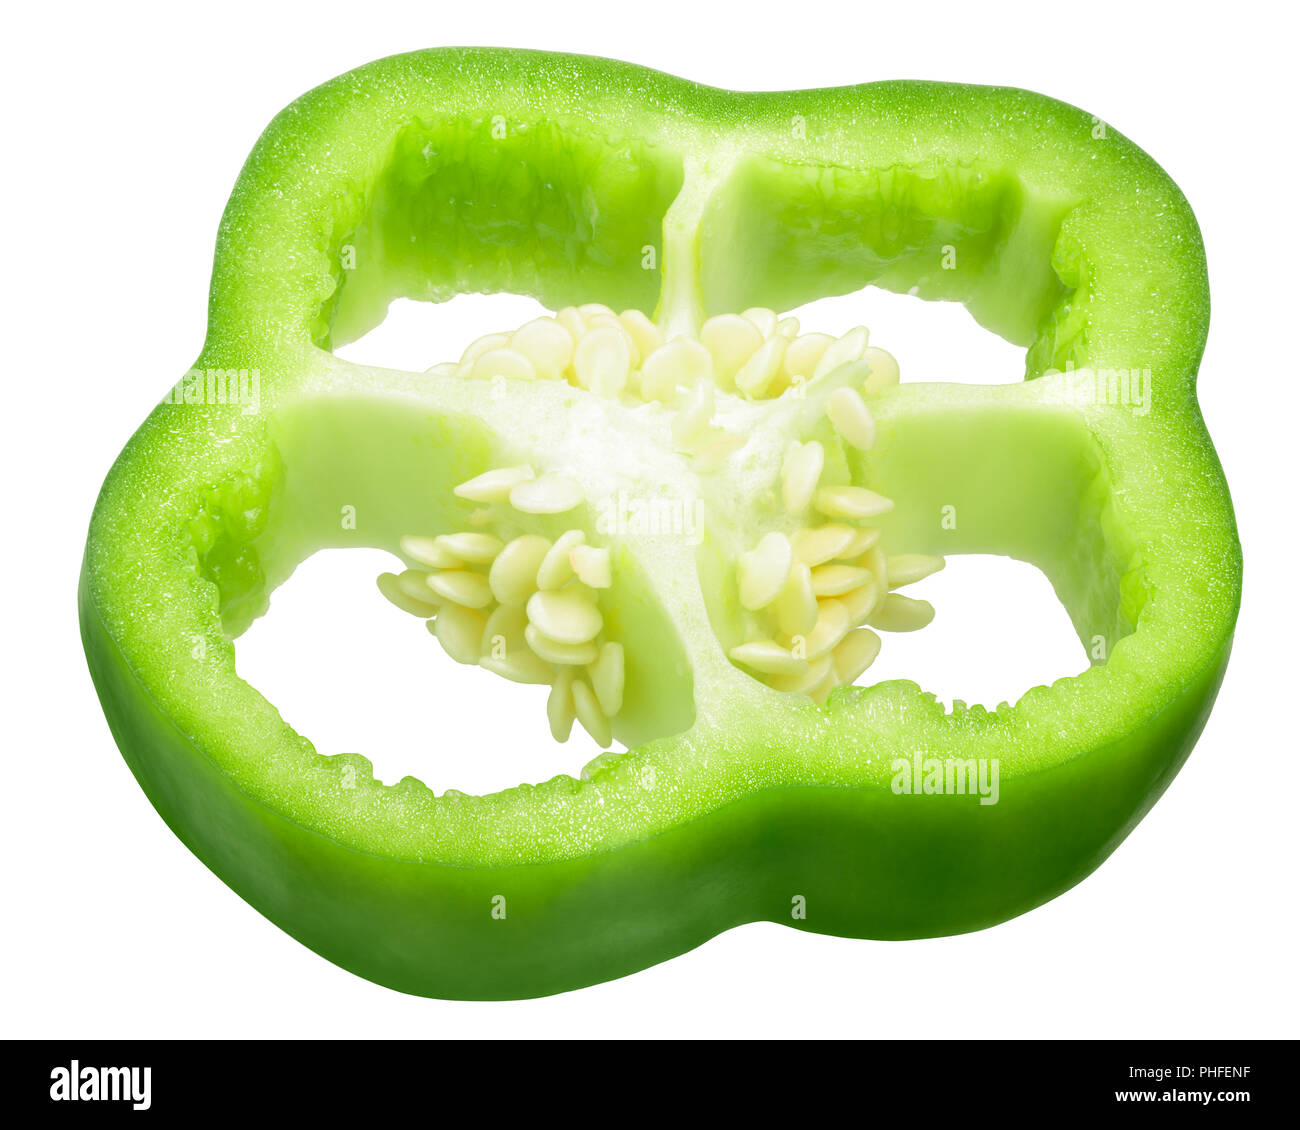 What The Heck Do I Do with Green Bell Peppers? - Misfits Market